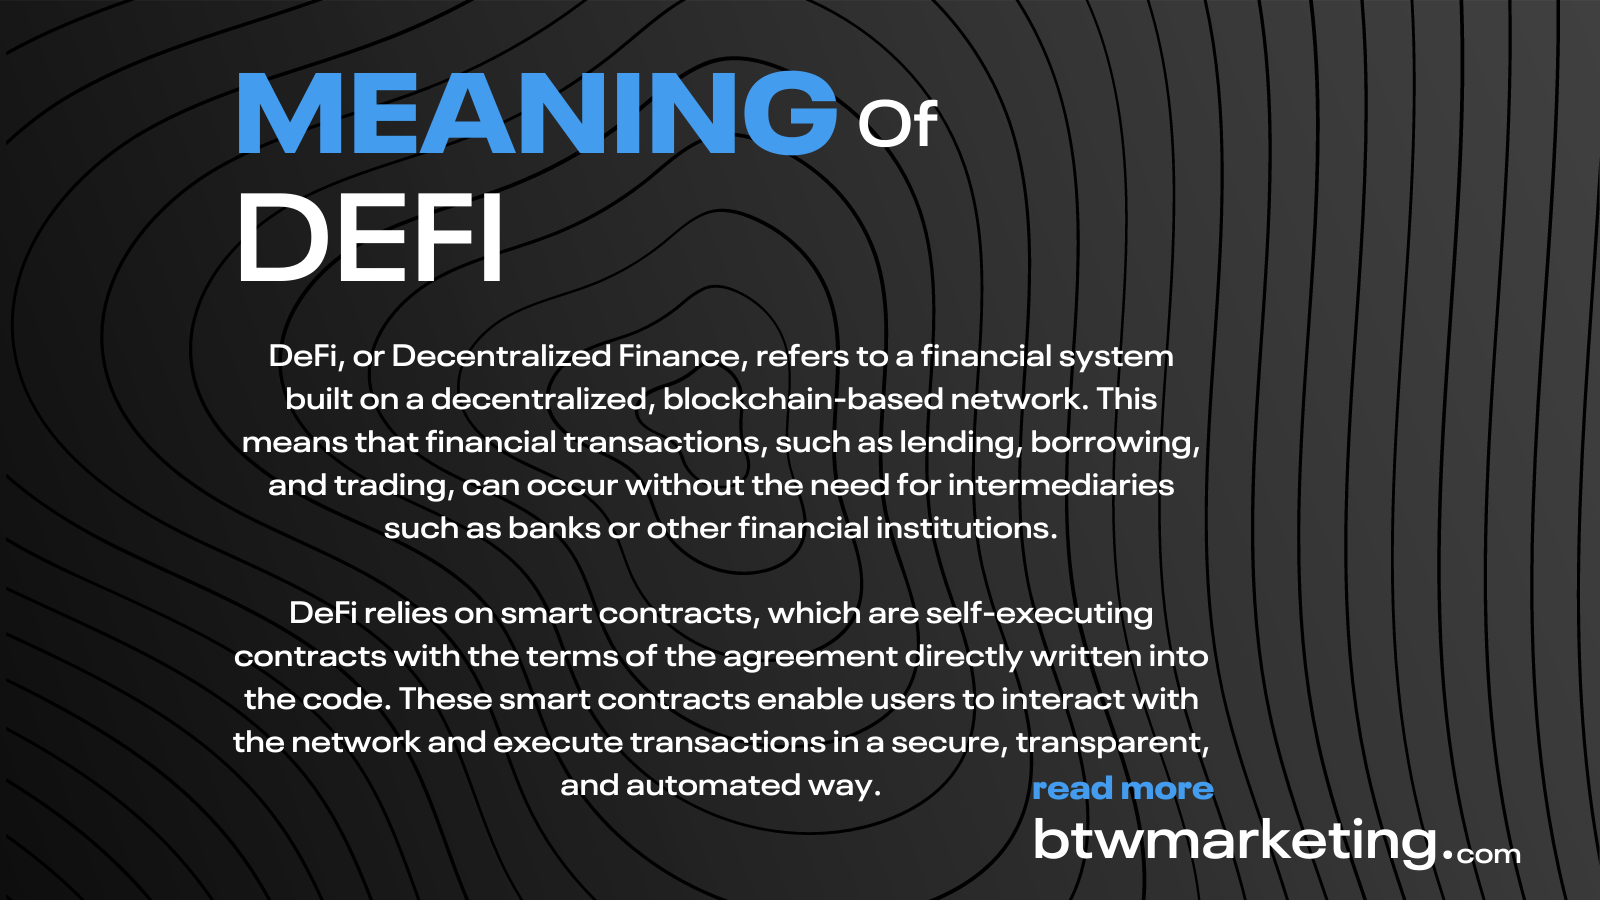 DeFi, or Decentralized Finance, refers to a financial system built on a decentralized, blockchain-based network. This means that financial transactions, such as lending, borrowing, and trading, can occur without the need for intermediaries such as banks or other financial institutions